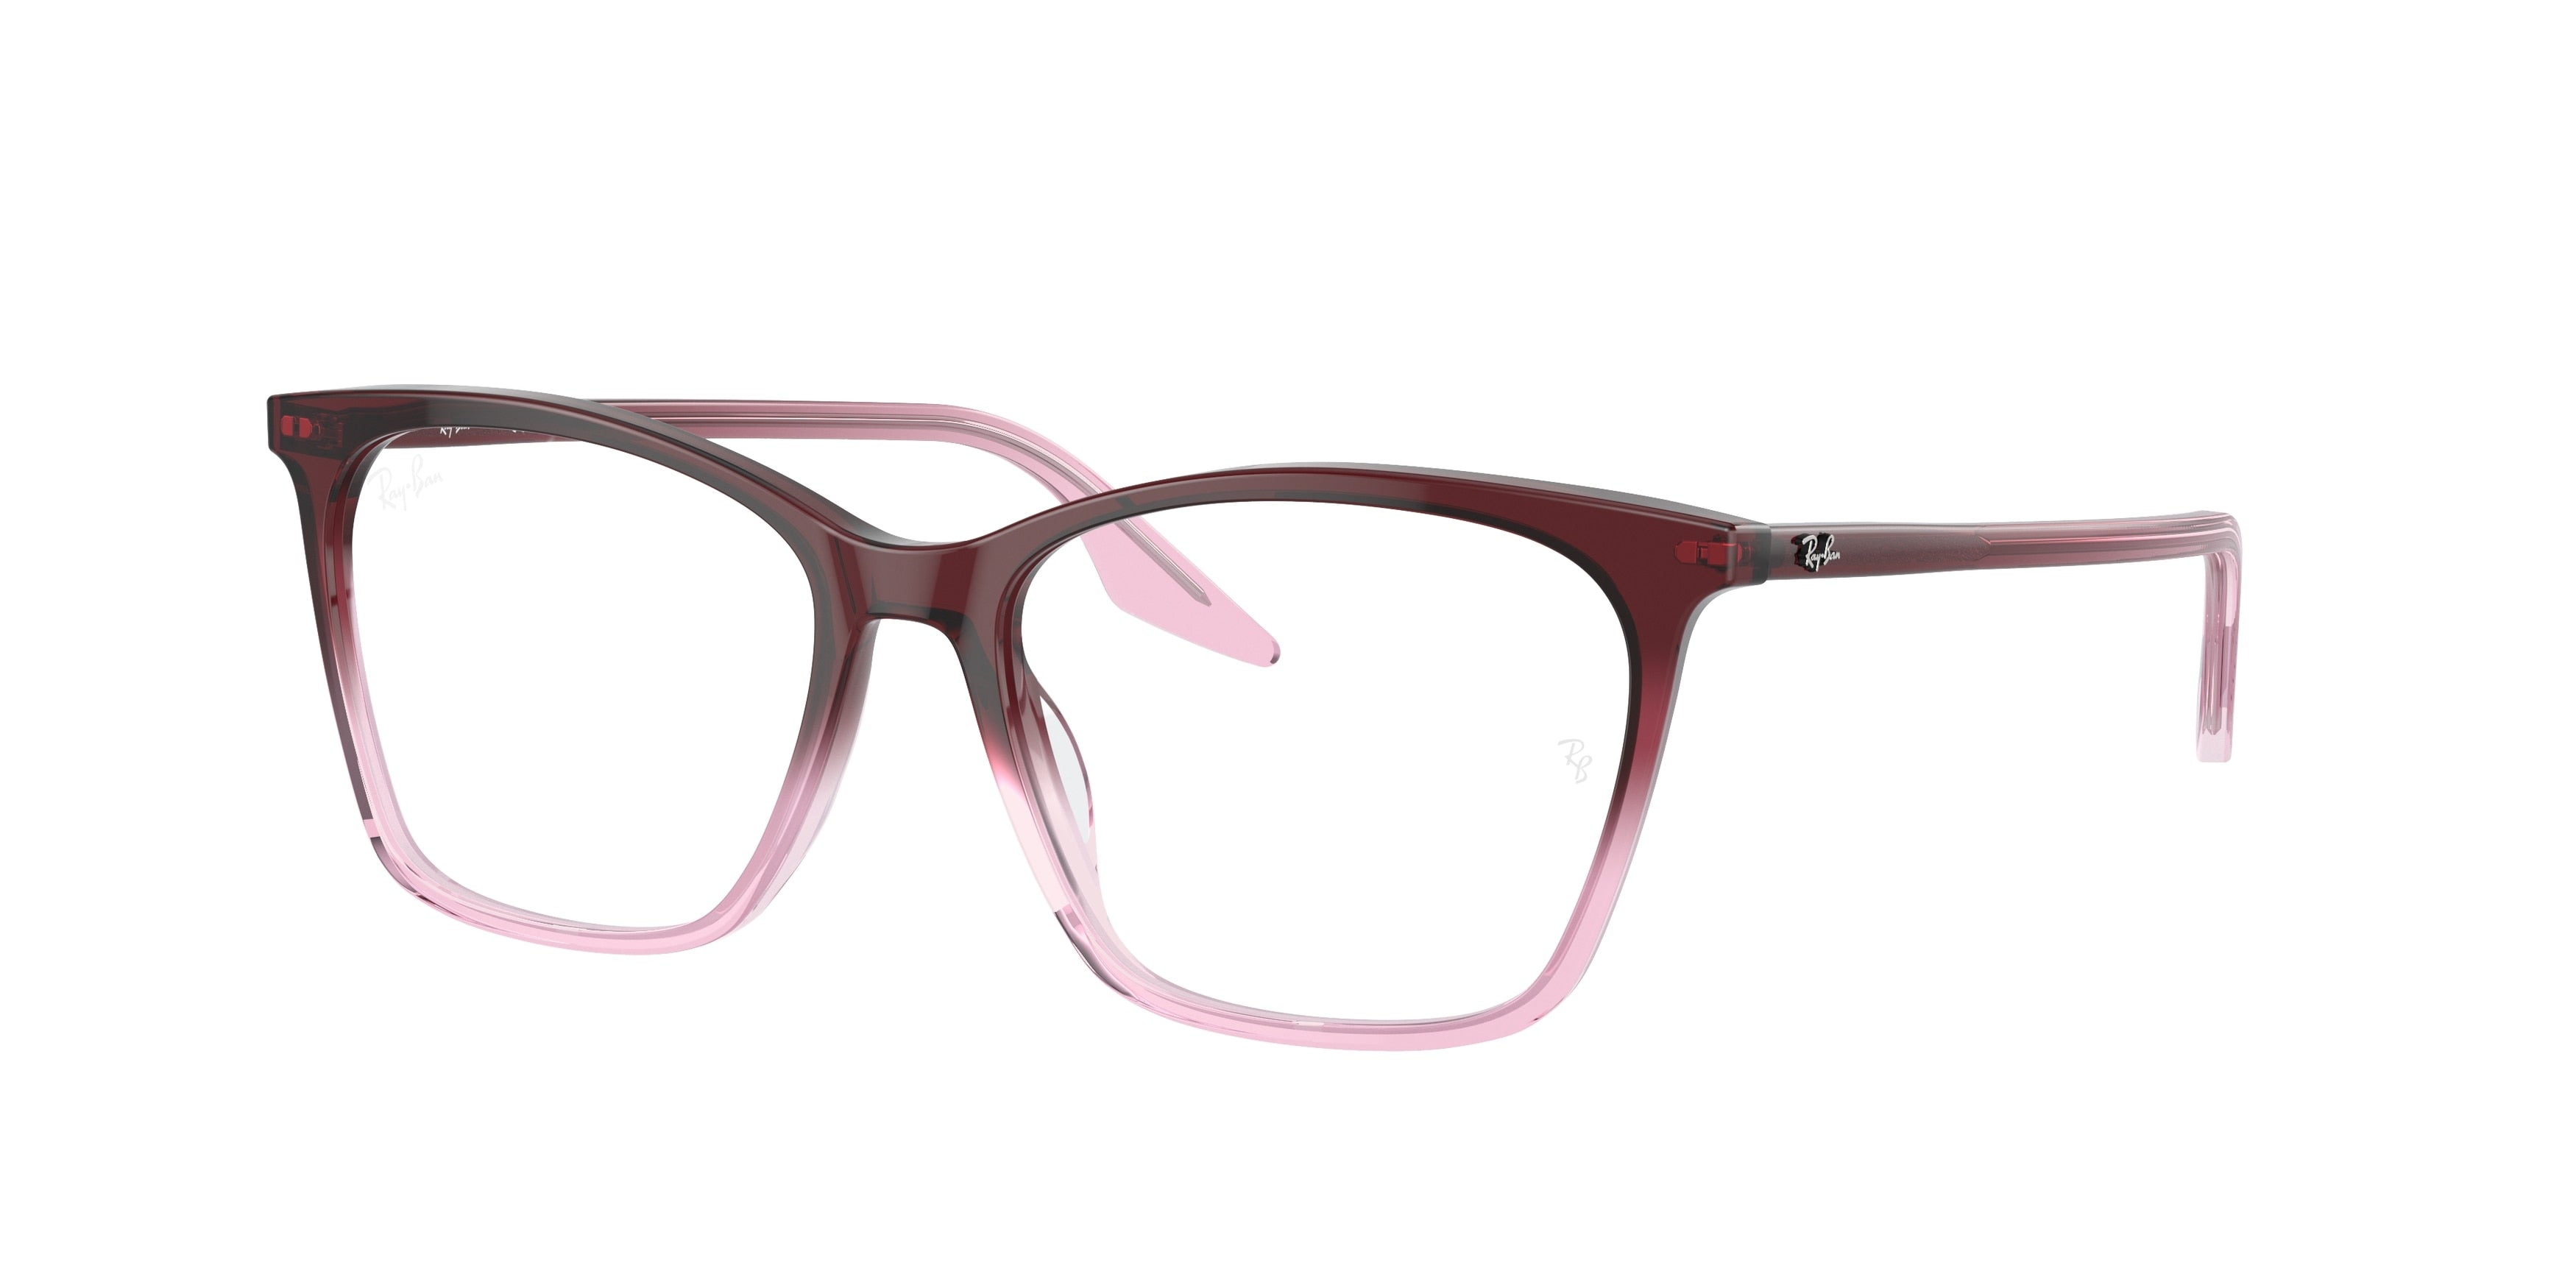 Ray-Ban Optical RX5422 Cat Eye Eyeglasses  8311-Red & Pink 54-145-16 - Color Map Red